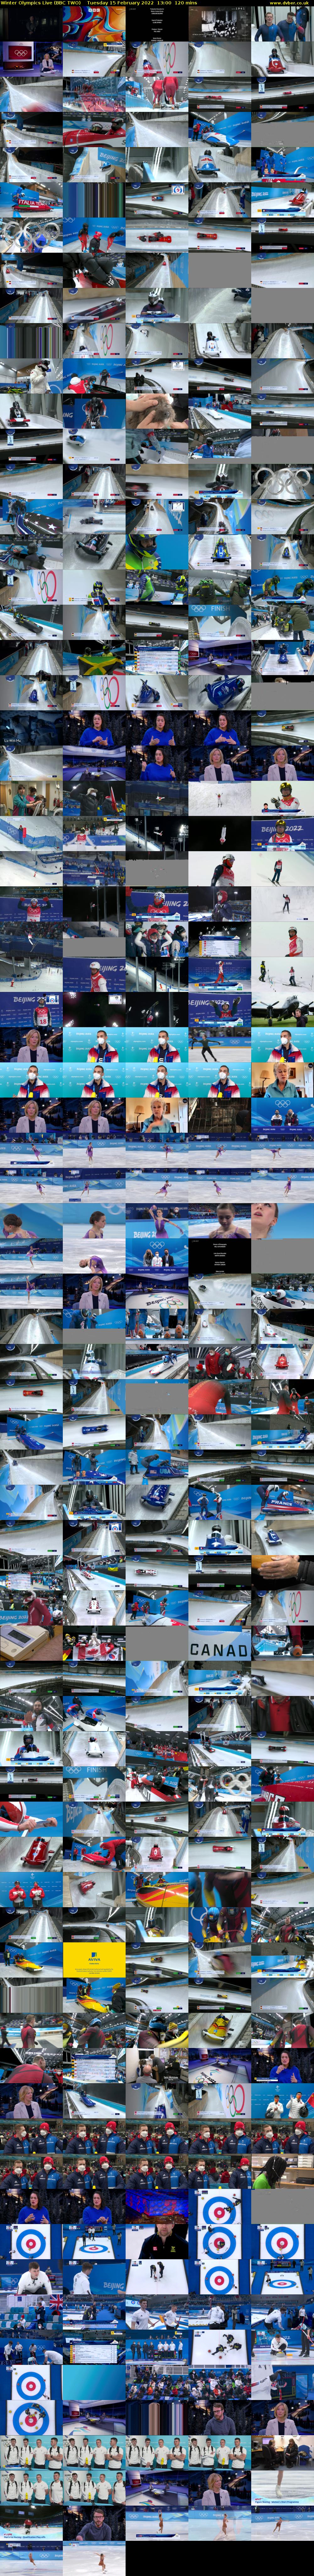 Winter Olympics Live (BBC TWO) Tuesday 15 February 2022 13:00 - 15:00